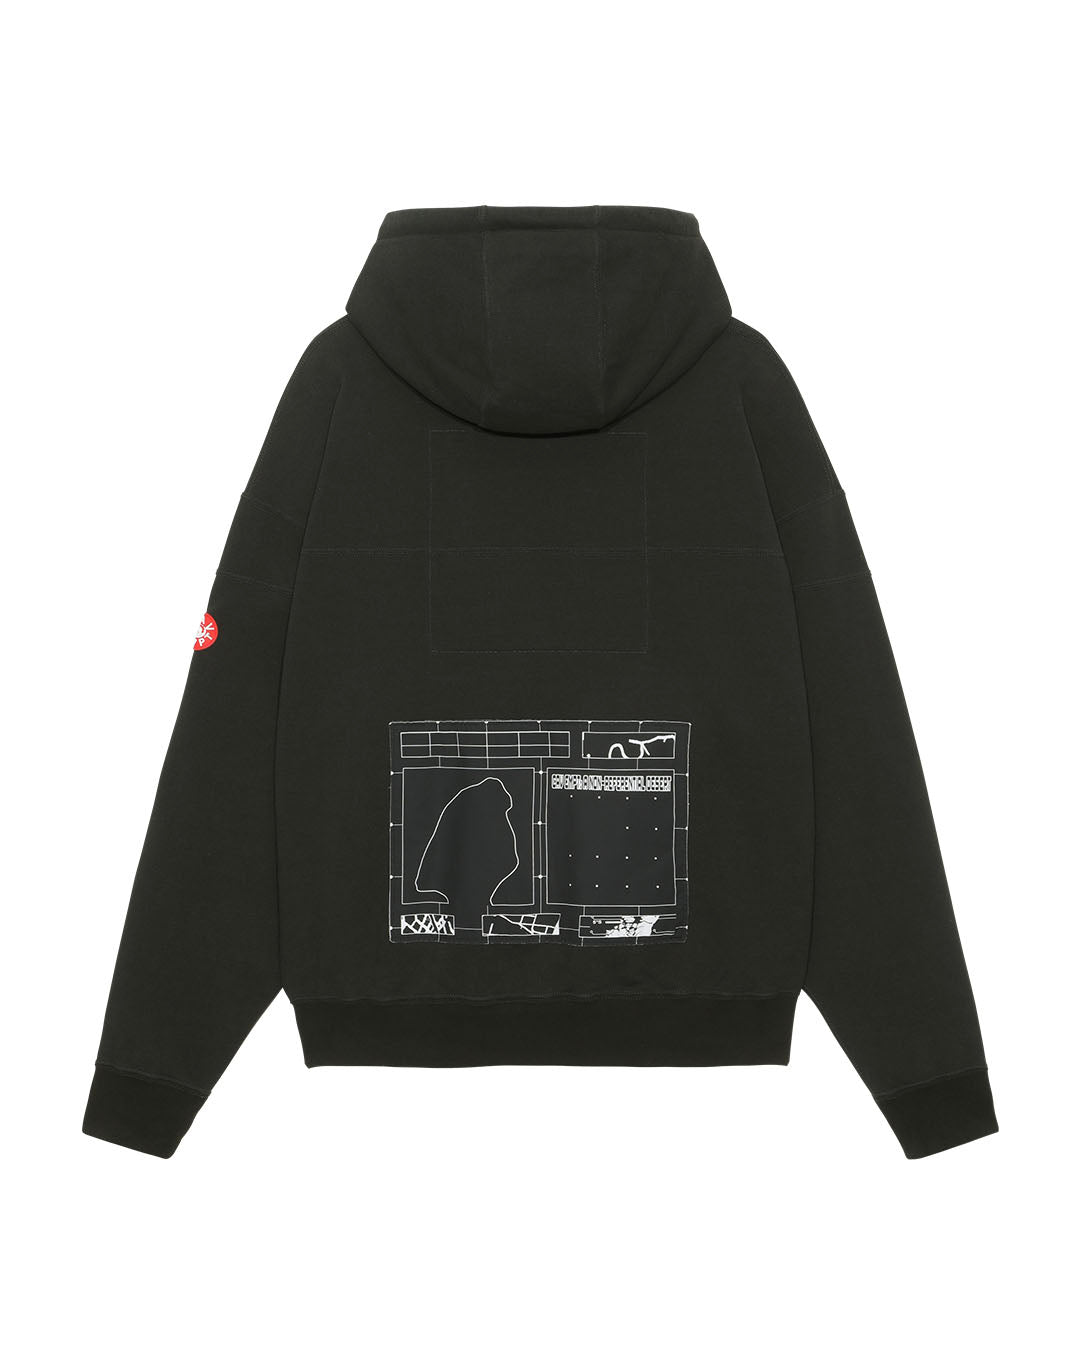 【C.E】CURVED SWITCH HOODY - BLACK